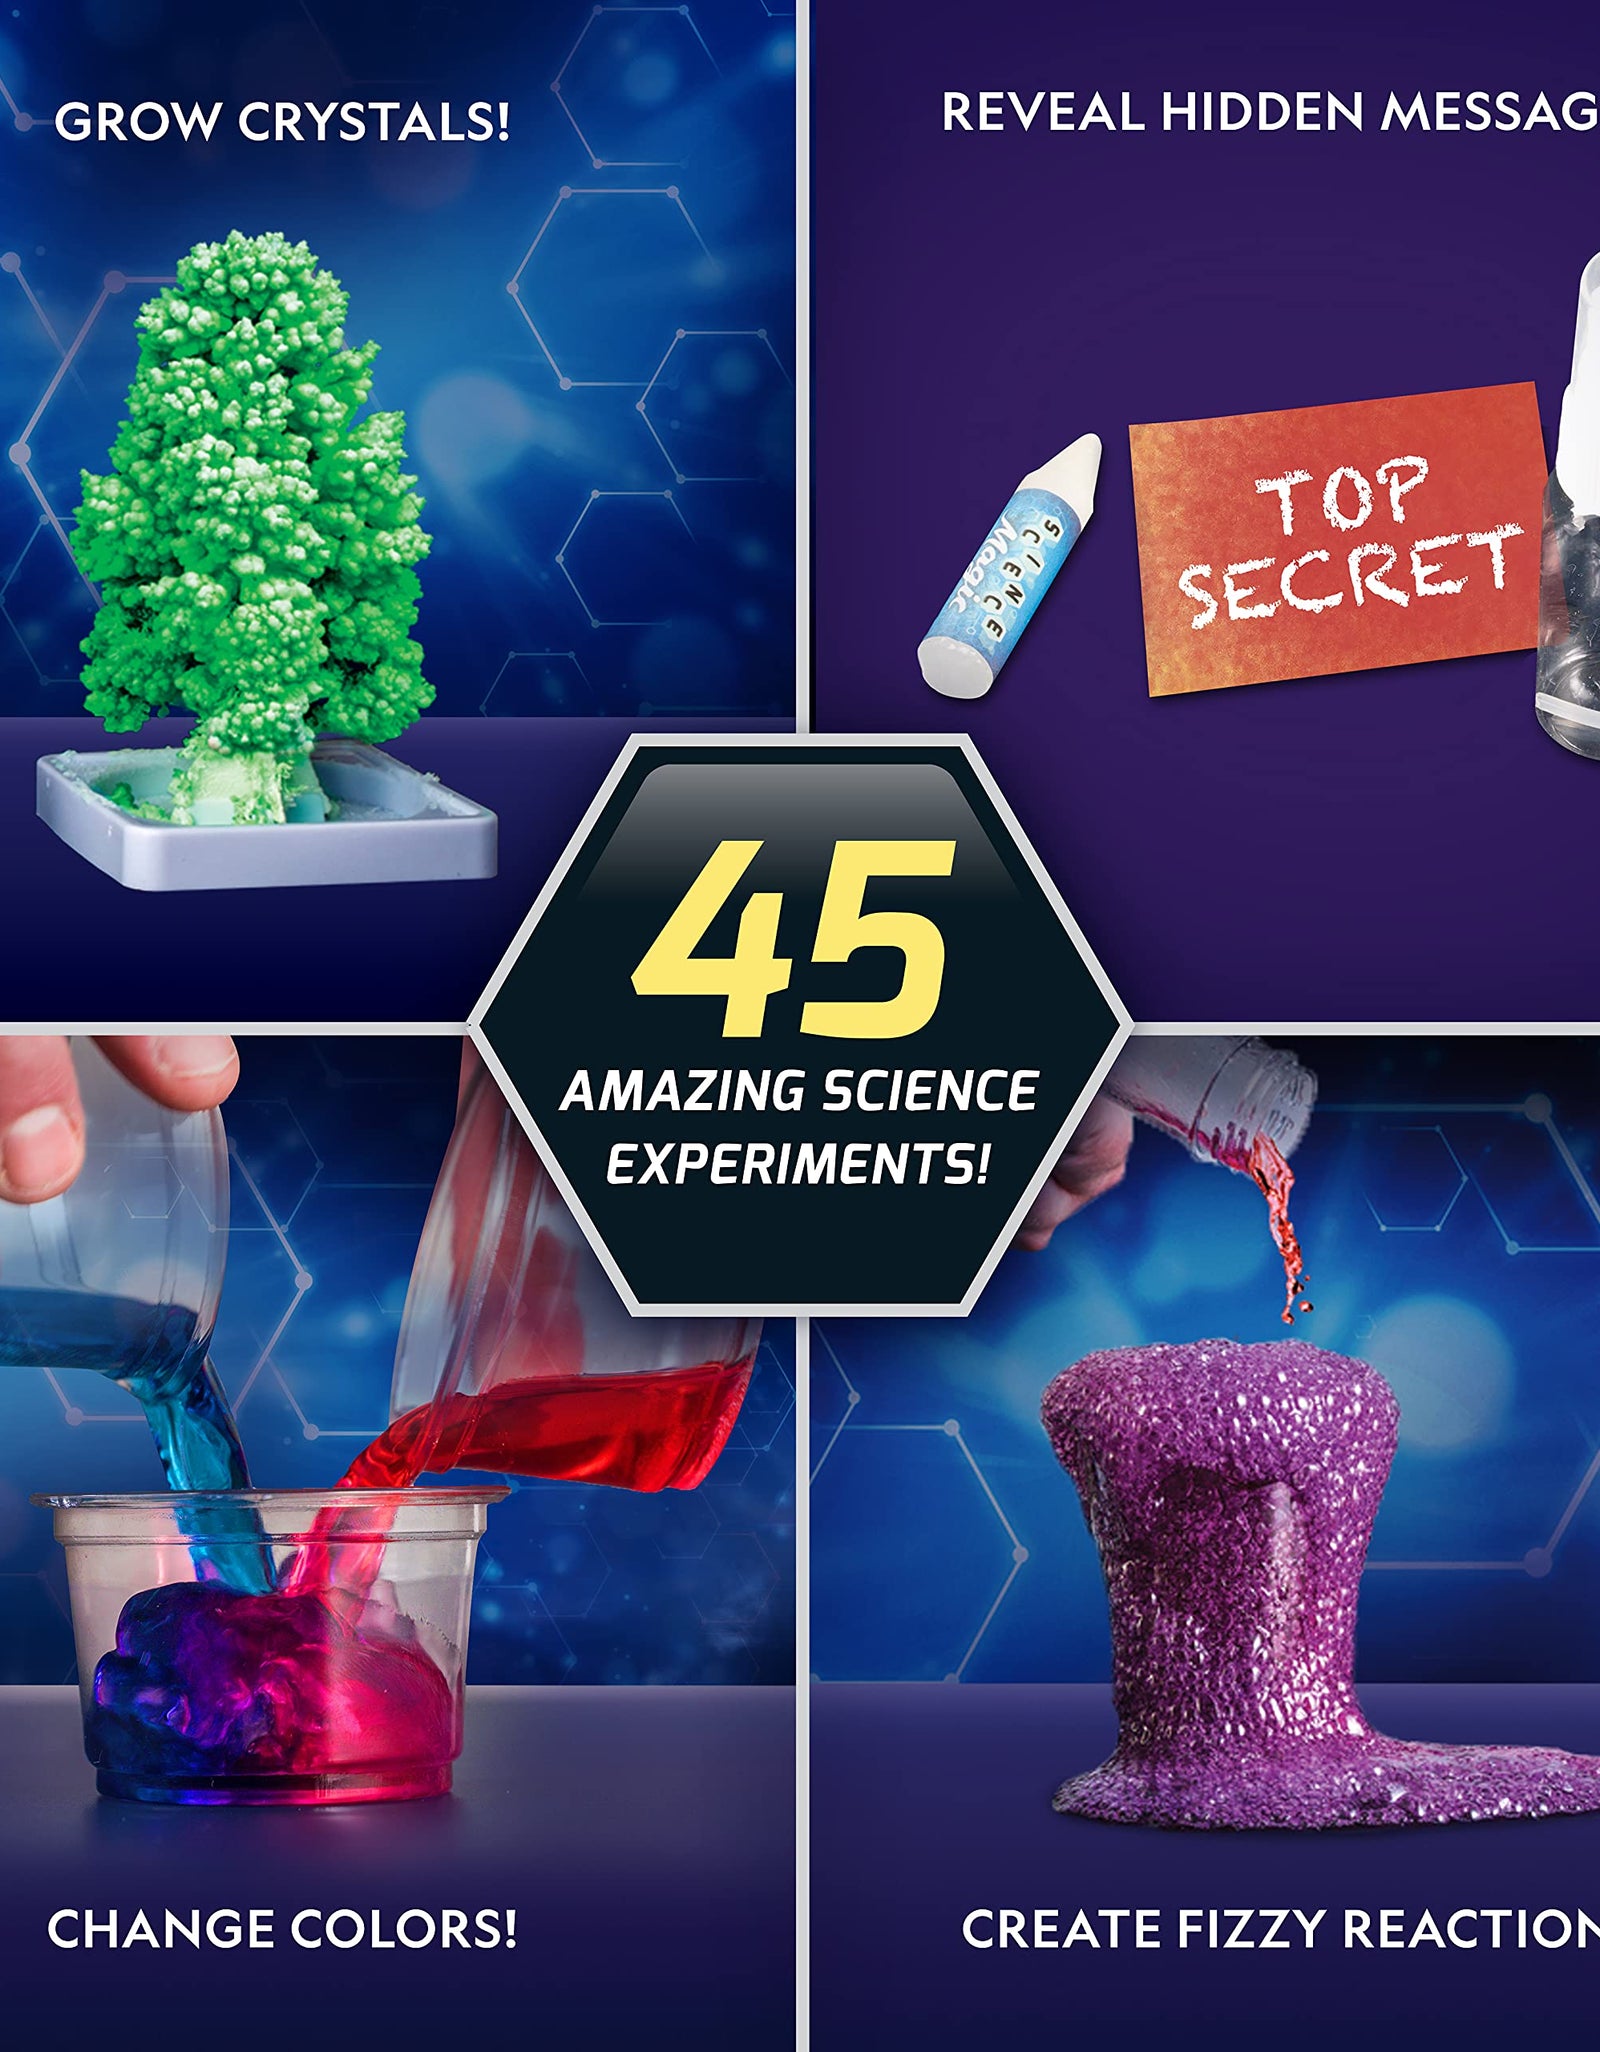 NATIONAL GEOGRAPHIC Amazing Chemistry Set - Mega Chemistry Kit with Over 15 Science Experiments, Make Glowing Worms, a Crystal Tree, Fizzy Solutions, and More, Great STEM Gift for Girls and Boys